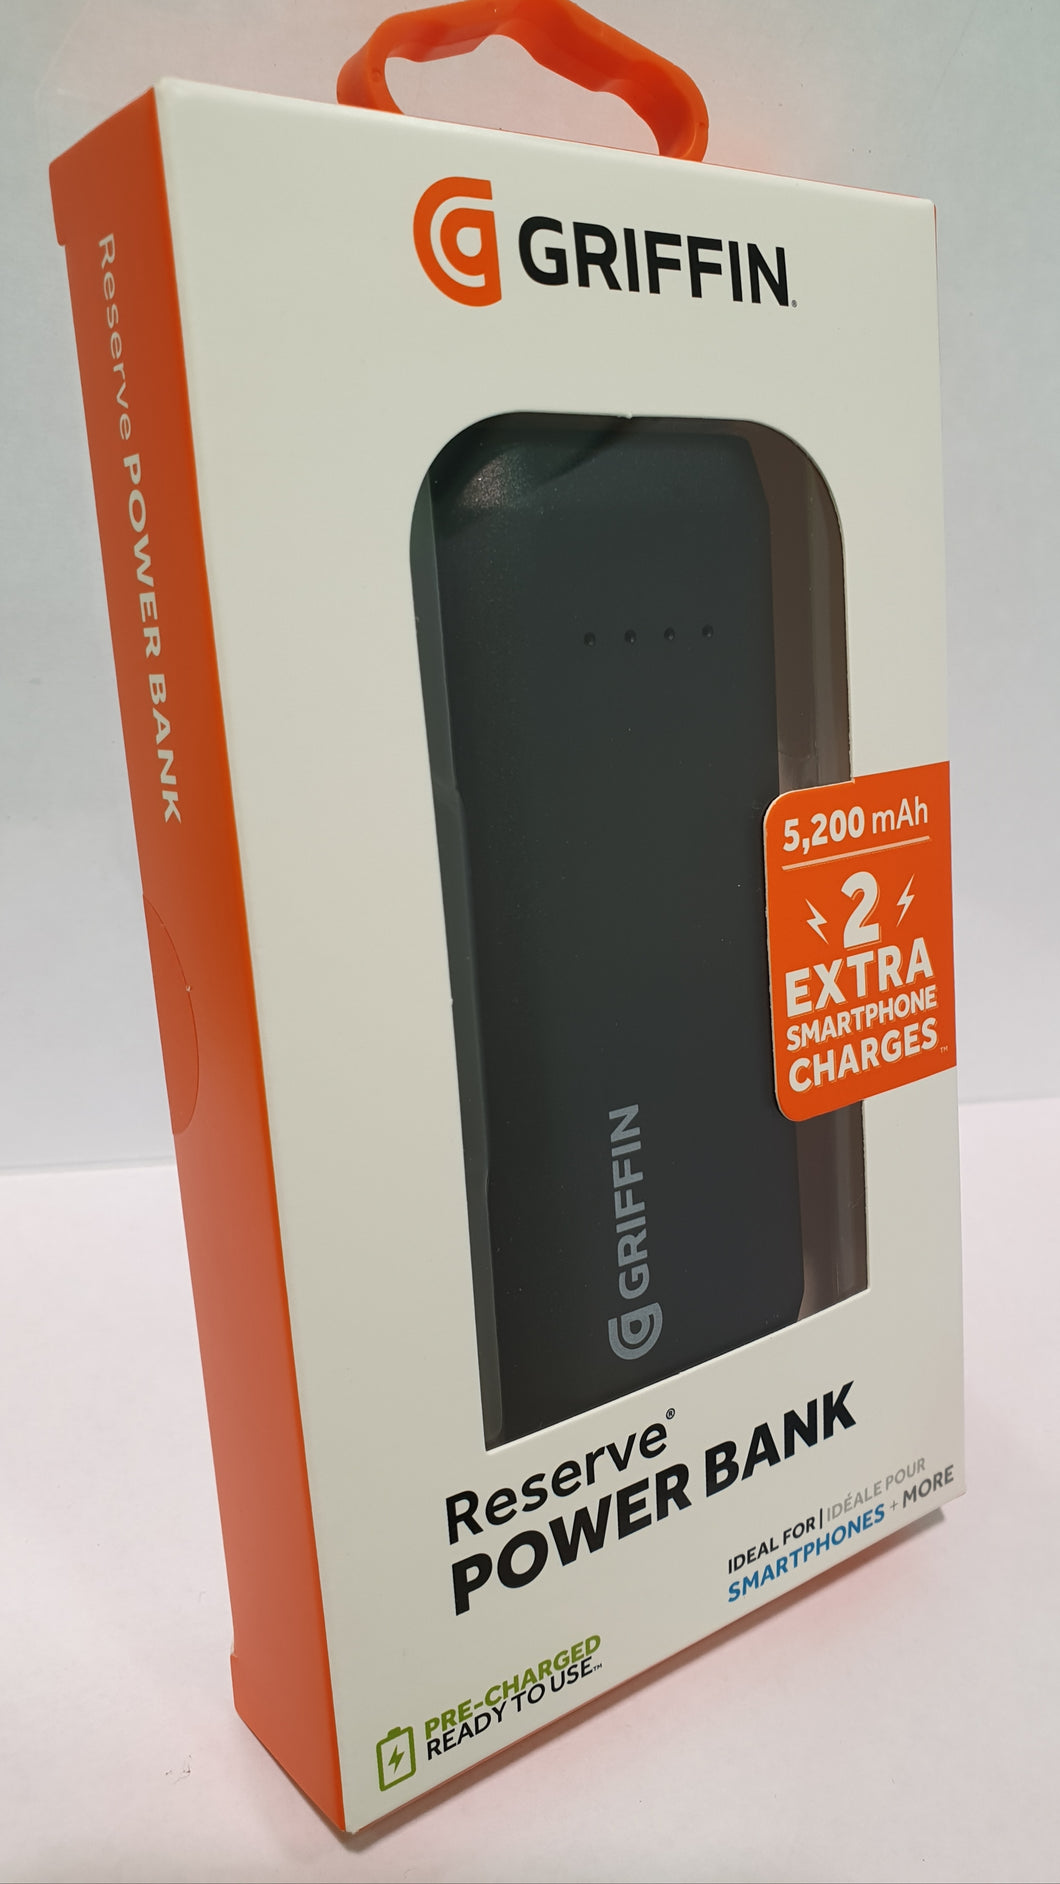 Griffin PowerBank USB 5200MAH 2x Extra SmartPhone Tablet Charges